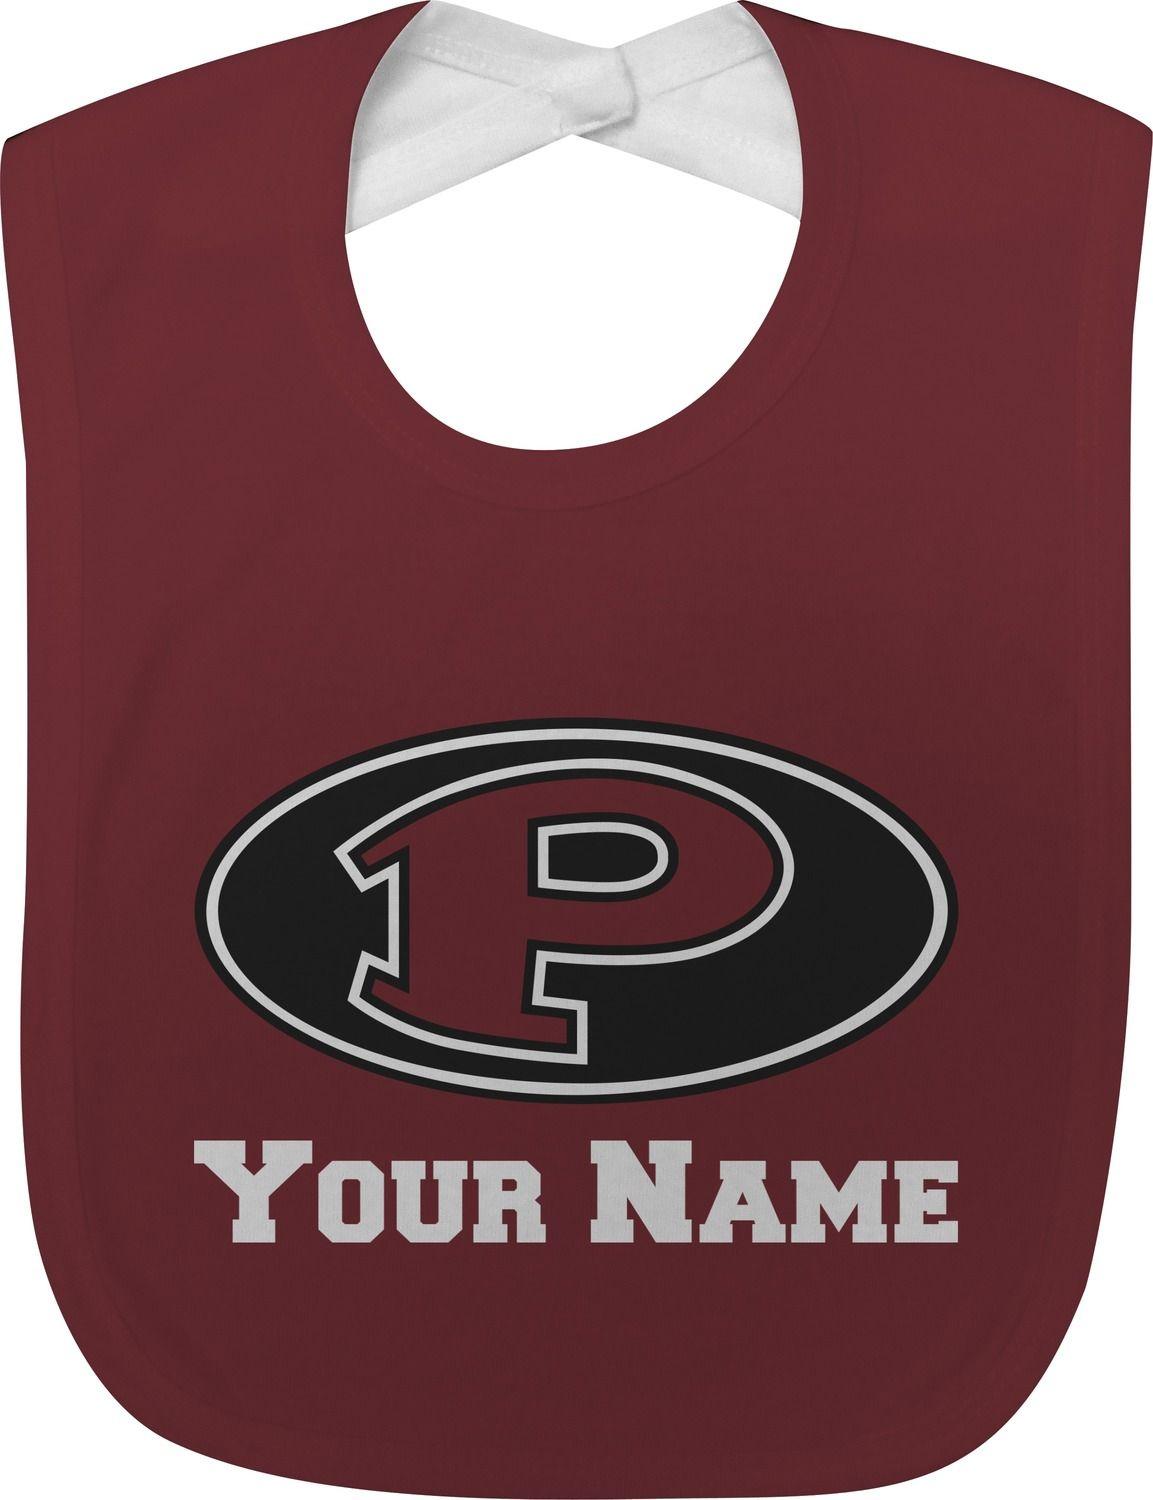 Pearland P Logo - Pearland Oilers P Baby Bib (Personalized)